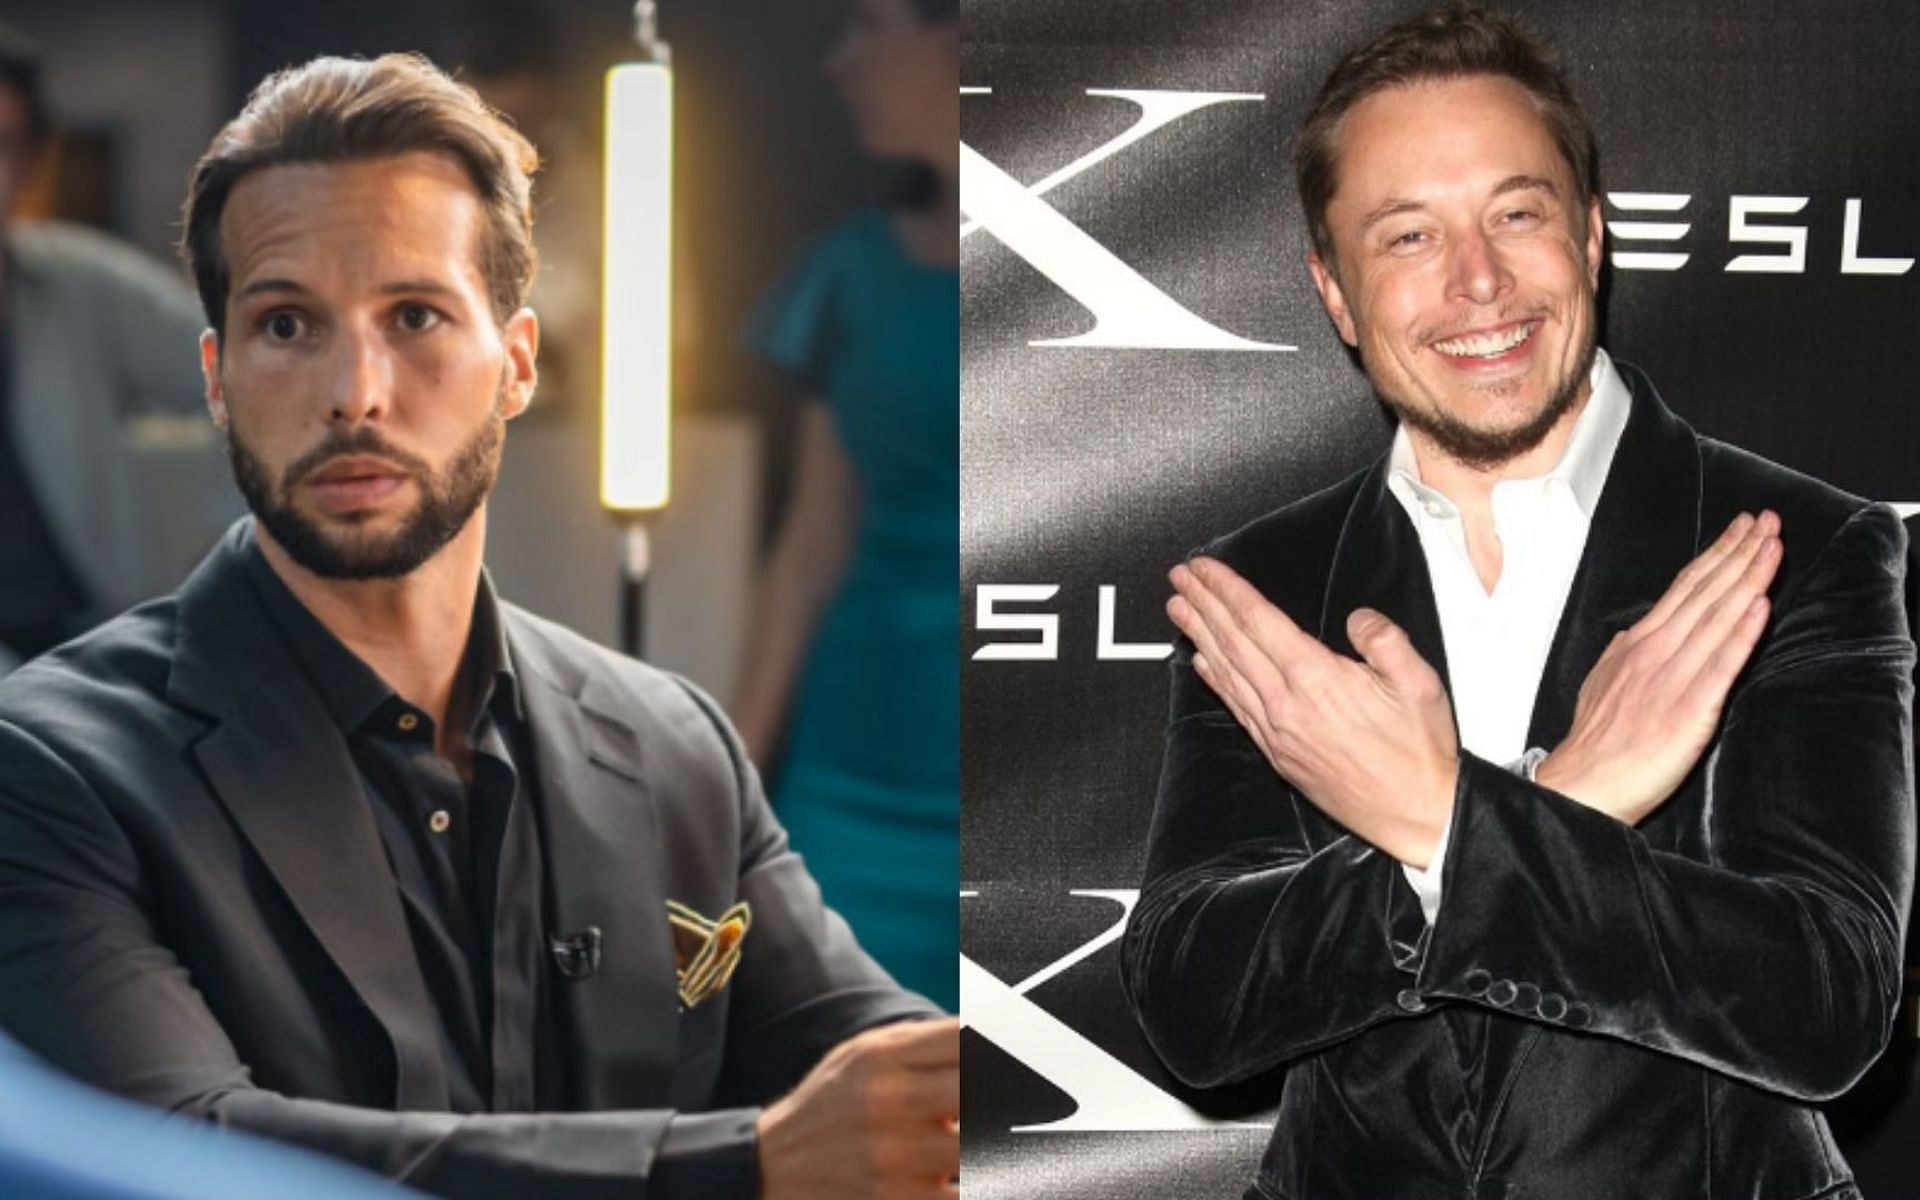 Tristan Tate (left) and Elon Musk (right) [Images courtesy: @elonmusk &amp; @tristanthetalisman on Twitter]